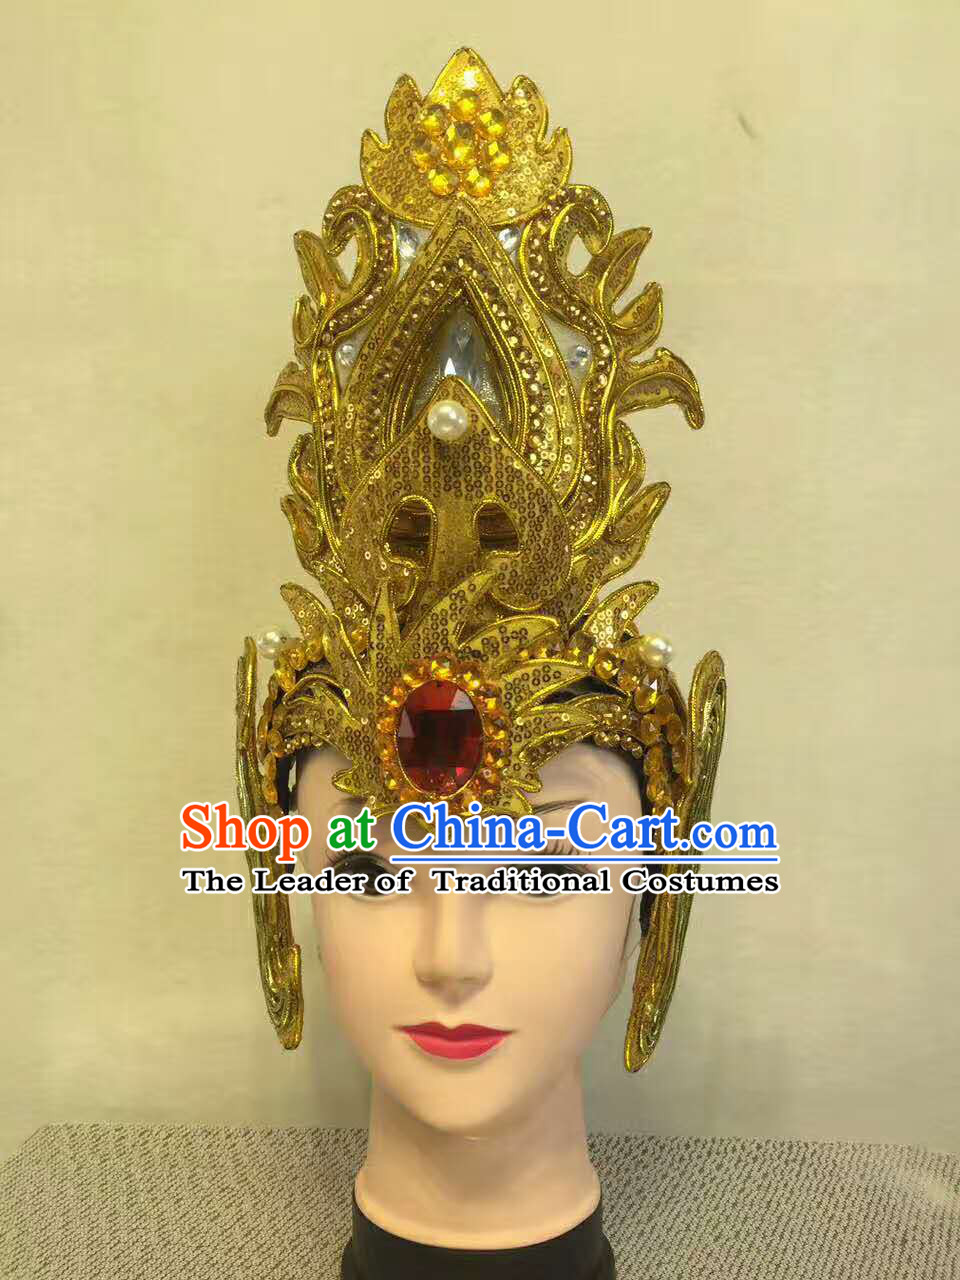 Professional Stage Performance Hat Made to Order Custom Tailored Head Wear Classical Headpieces Hair Accessories